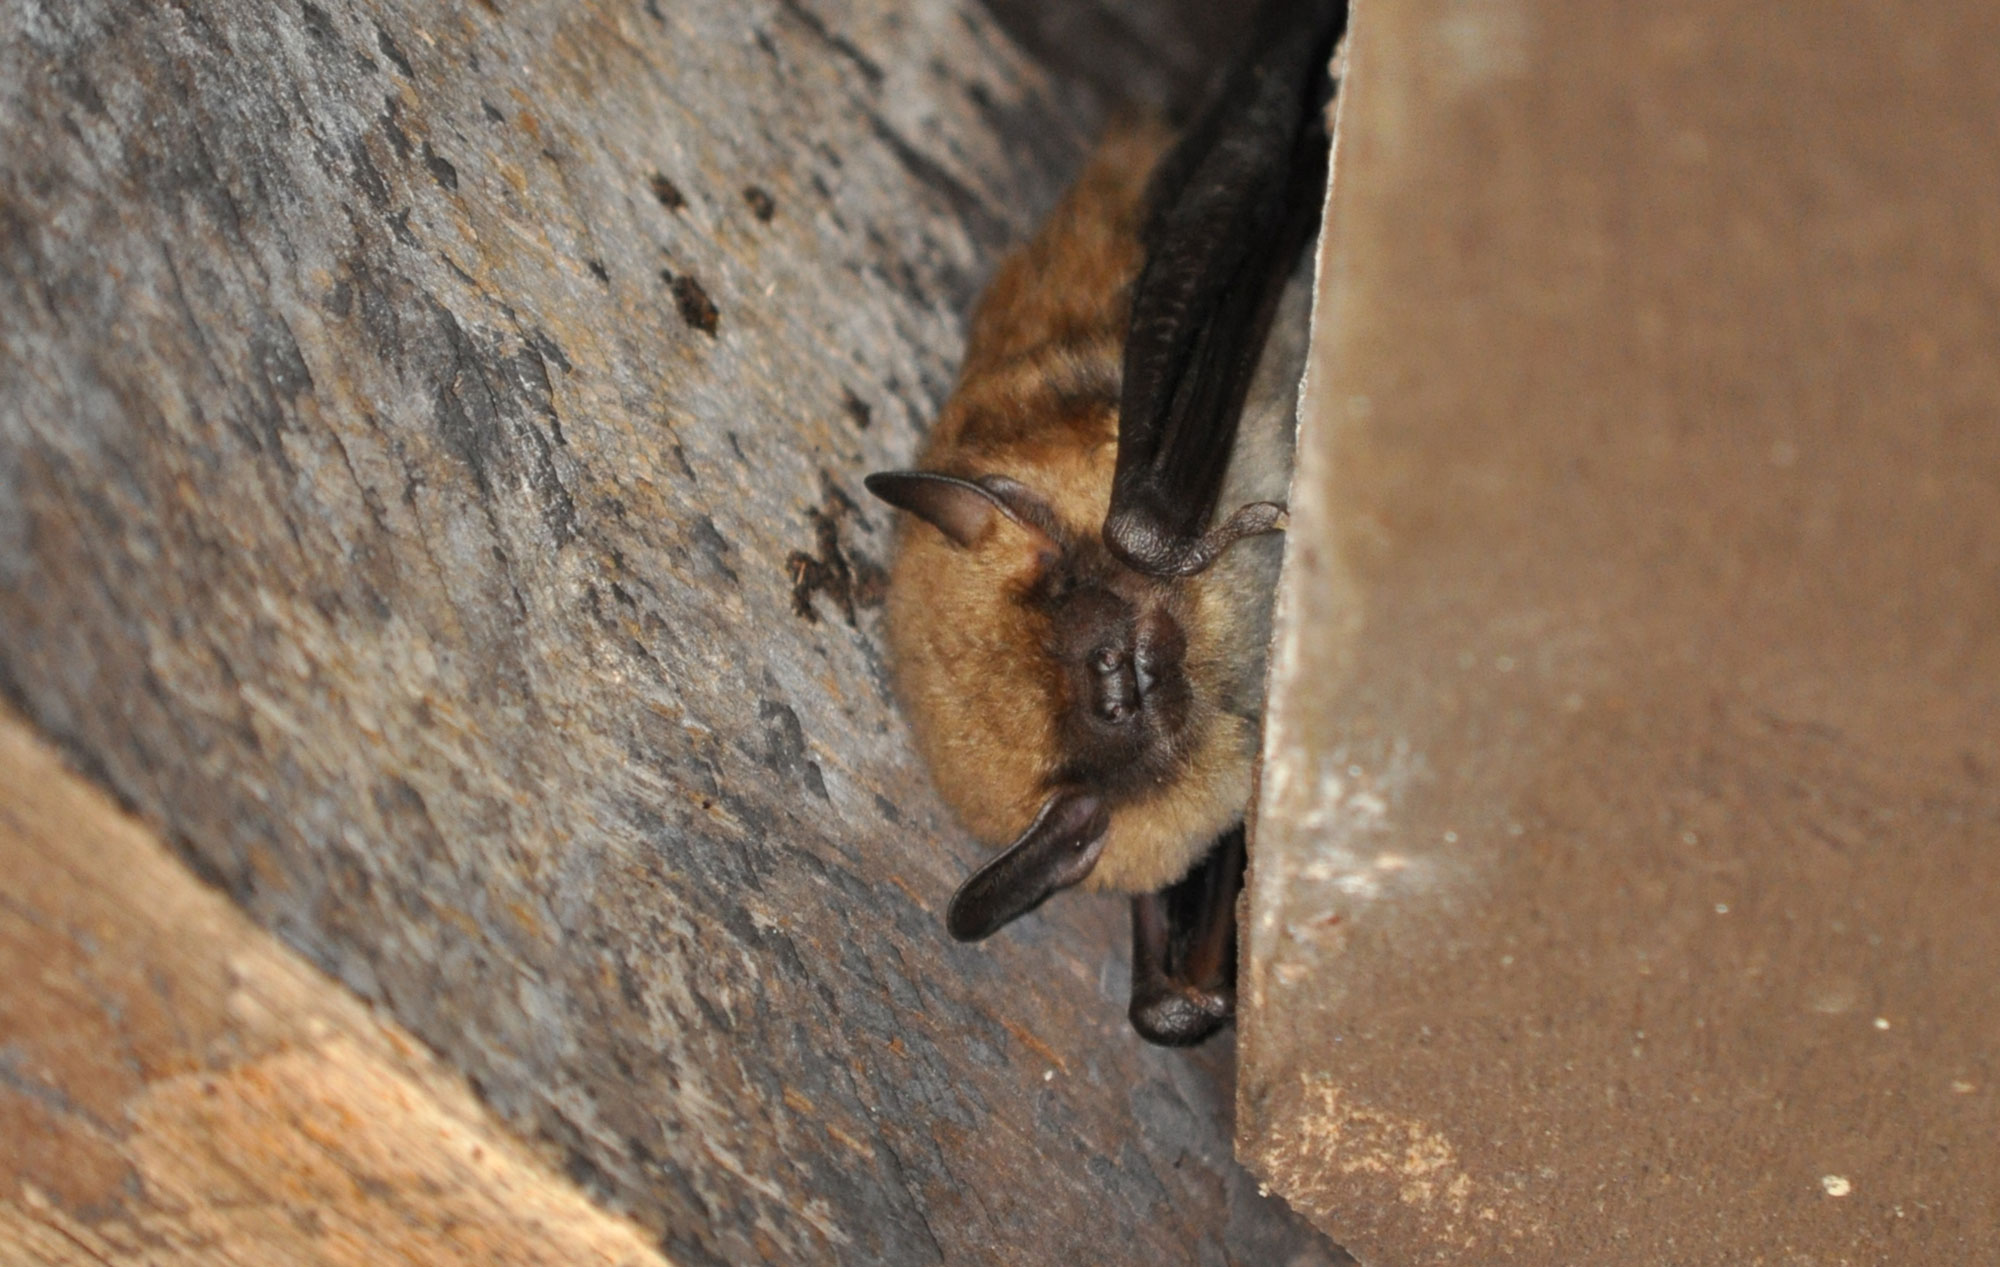 A big brown bat roosting in a wooden structure.